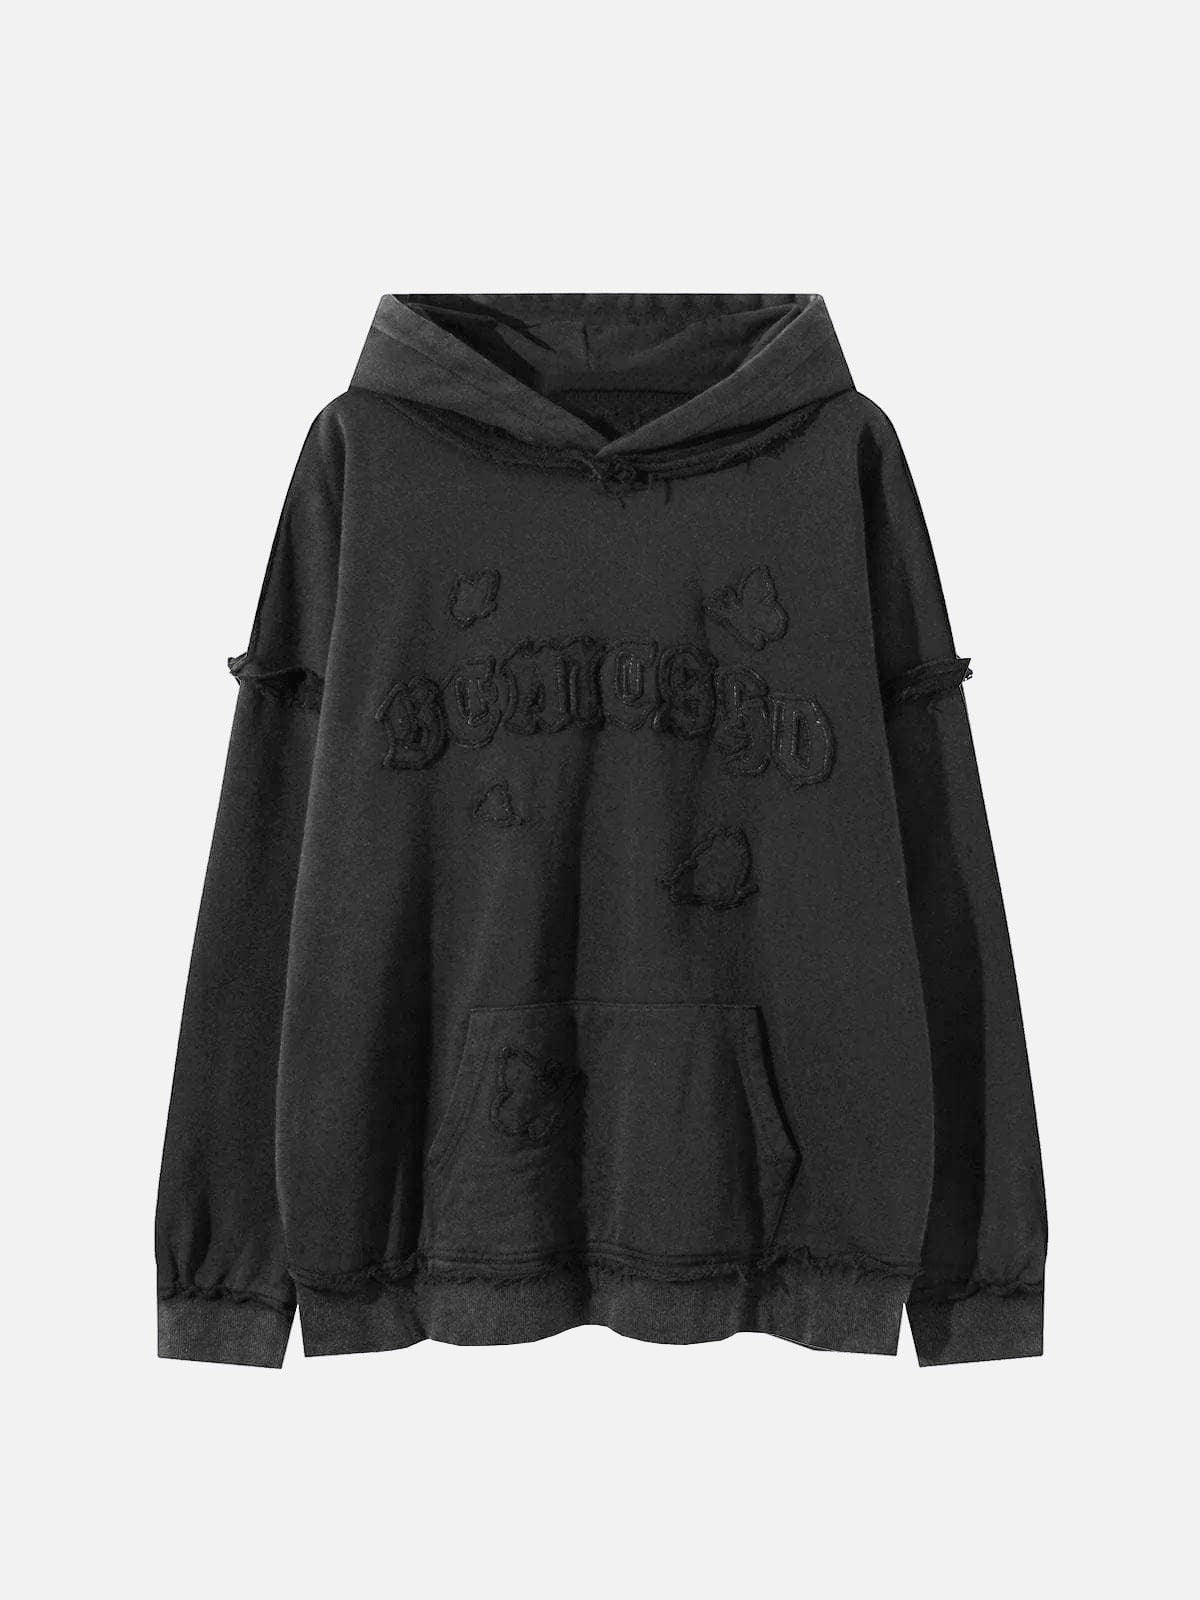 NEV Distressed Applique Embroidery Hoodie